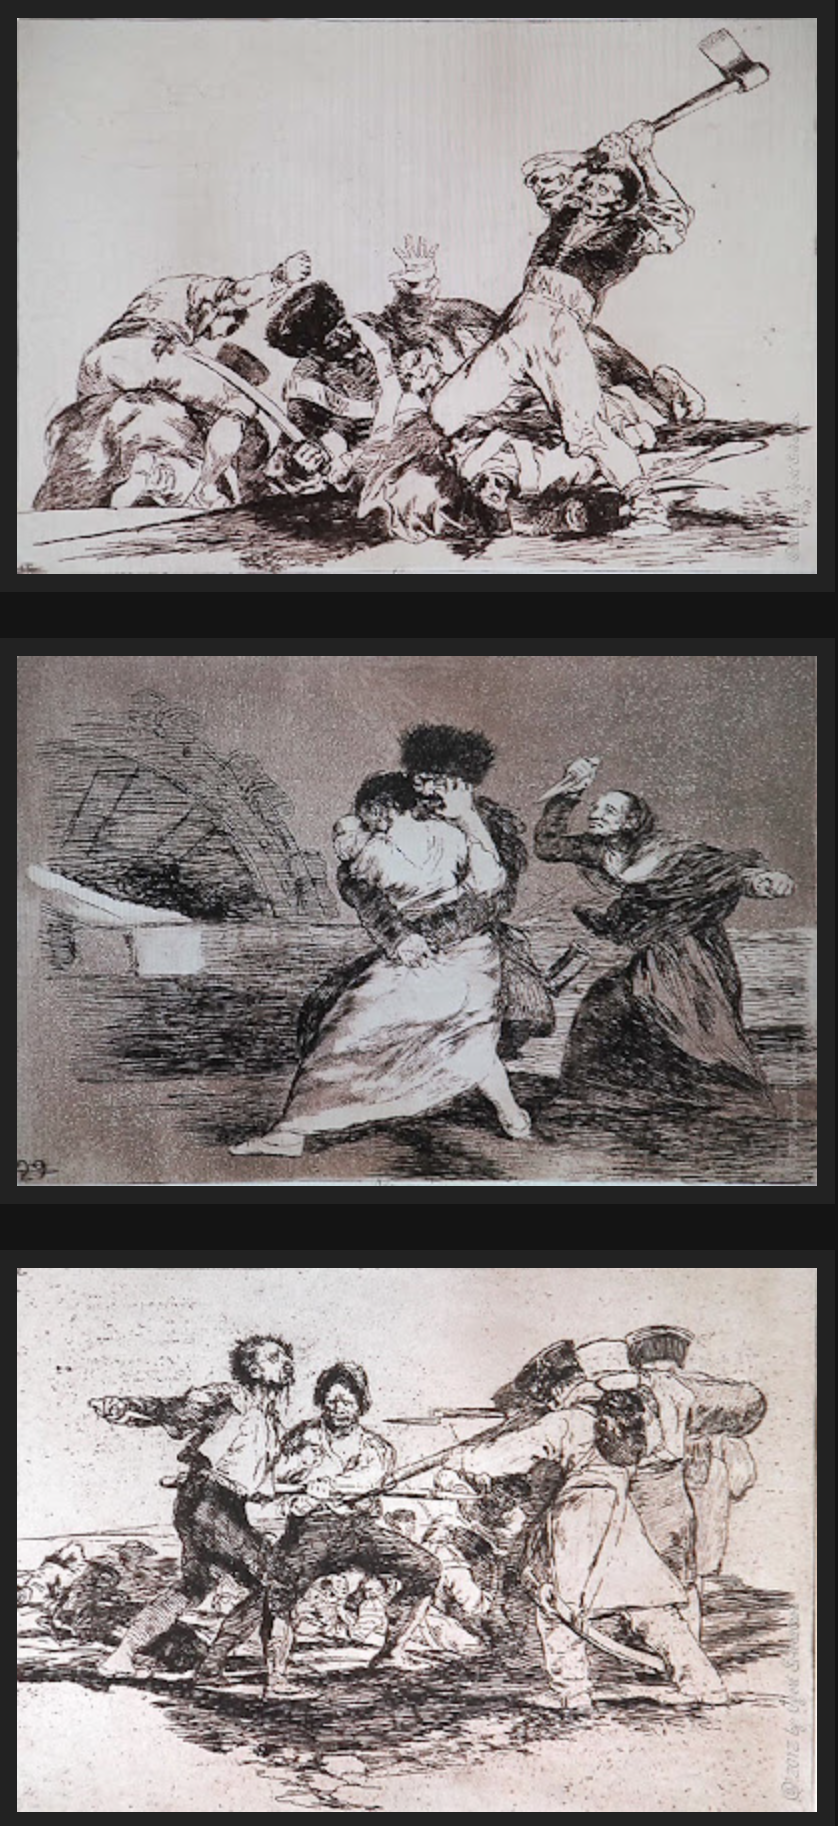  Francisco Goya, "The Disasters of War",”  1810-1820 